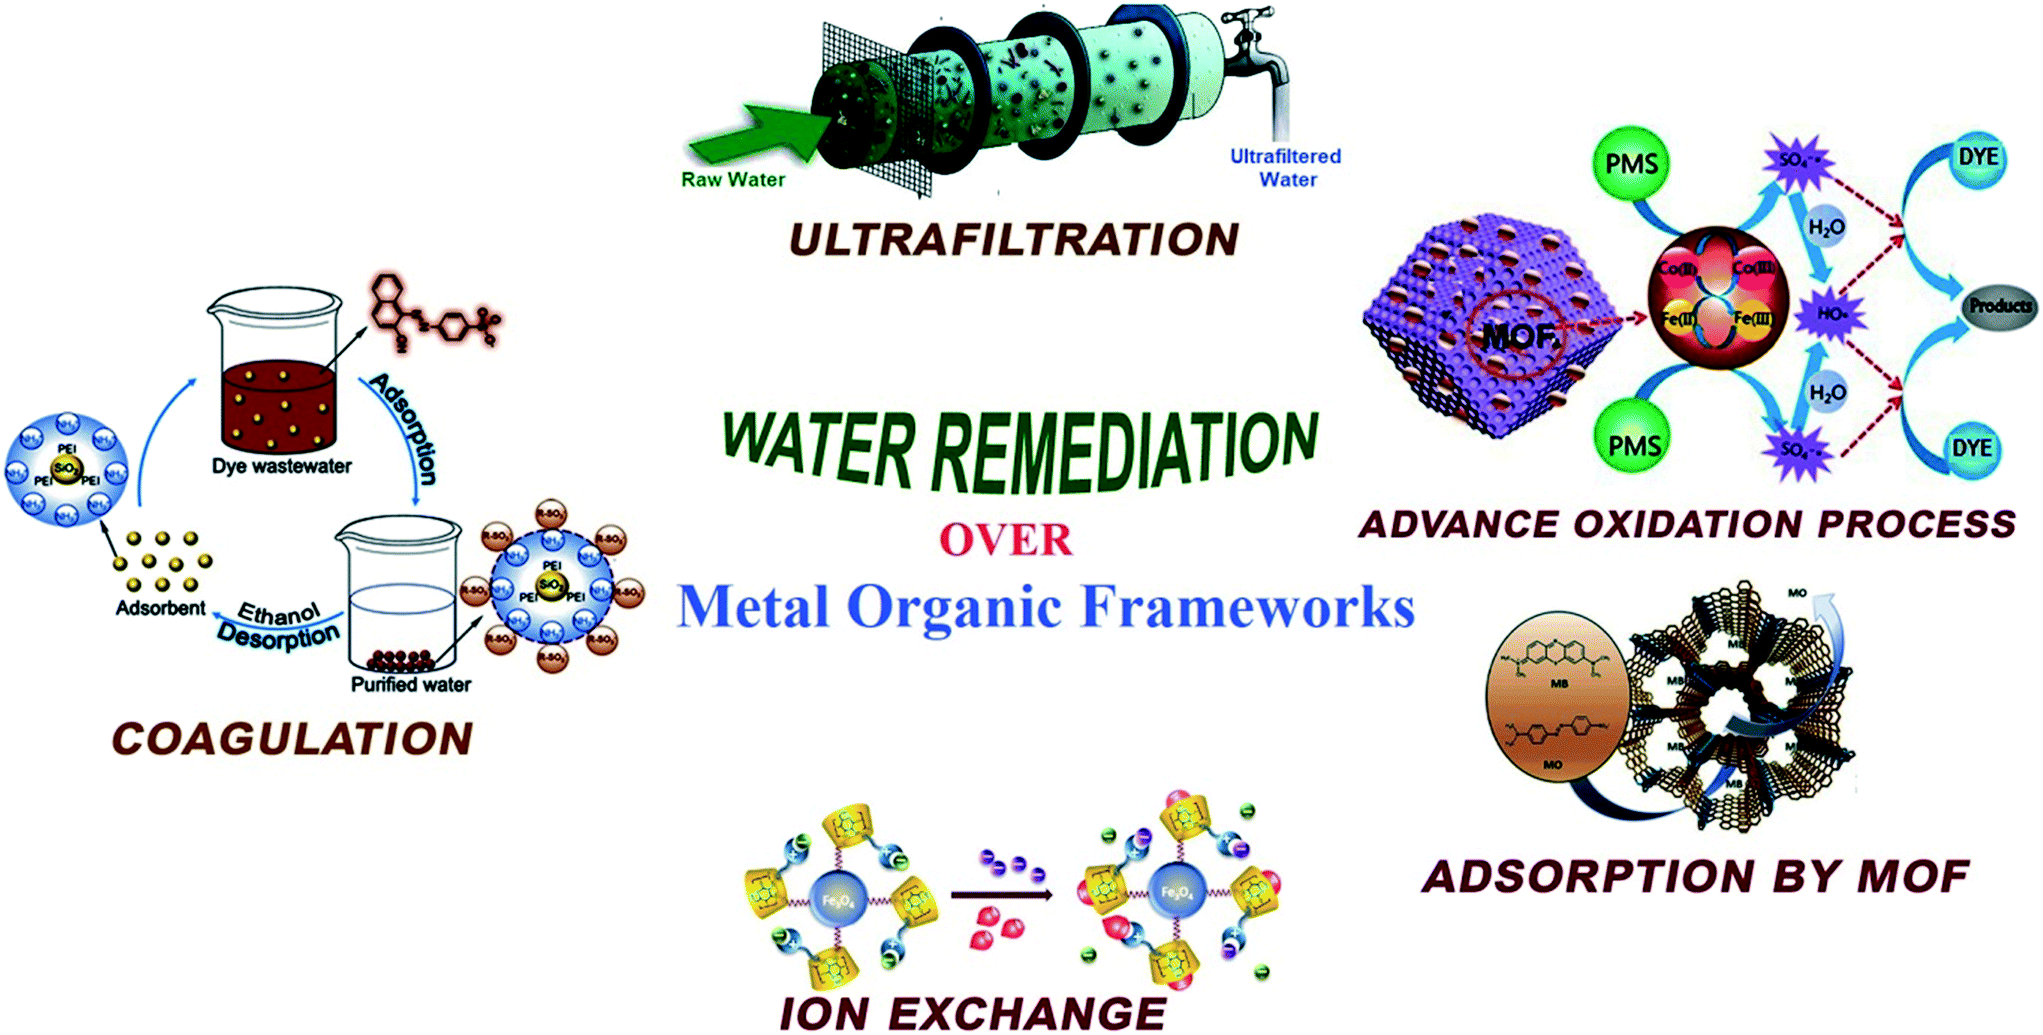 Syntheses Design Strategies And Photocatalytic Charge Dynamics Of Metal Organic Frameworks Mofs A Catalyzed Photo Degradation Approach Towards Or Catalysis Science Technology Rsc Publishing Doi 10 1039 D0cyf